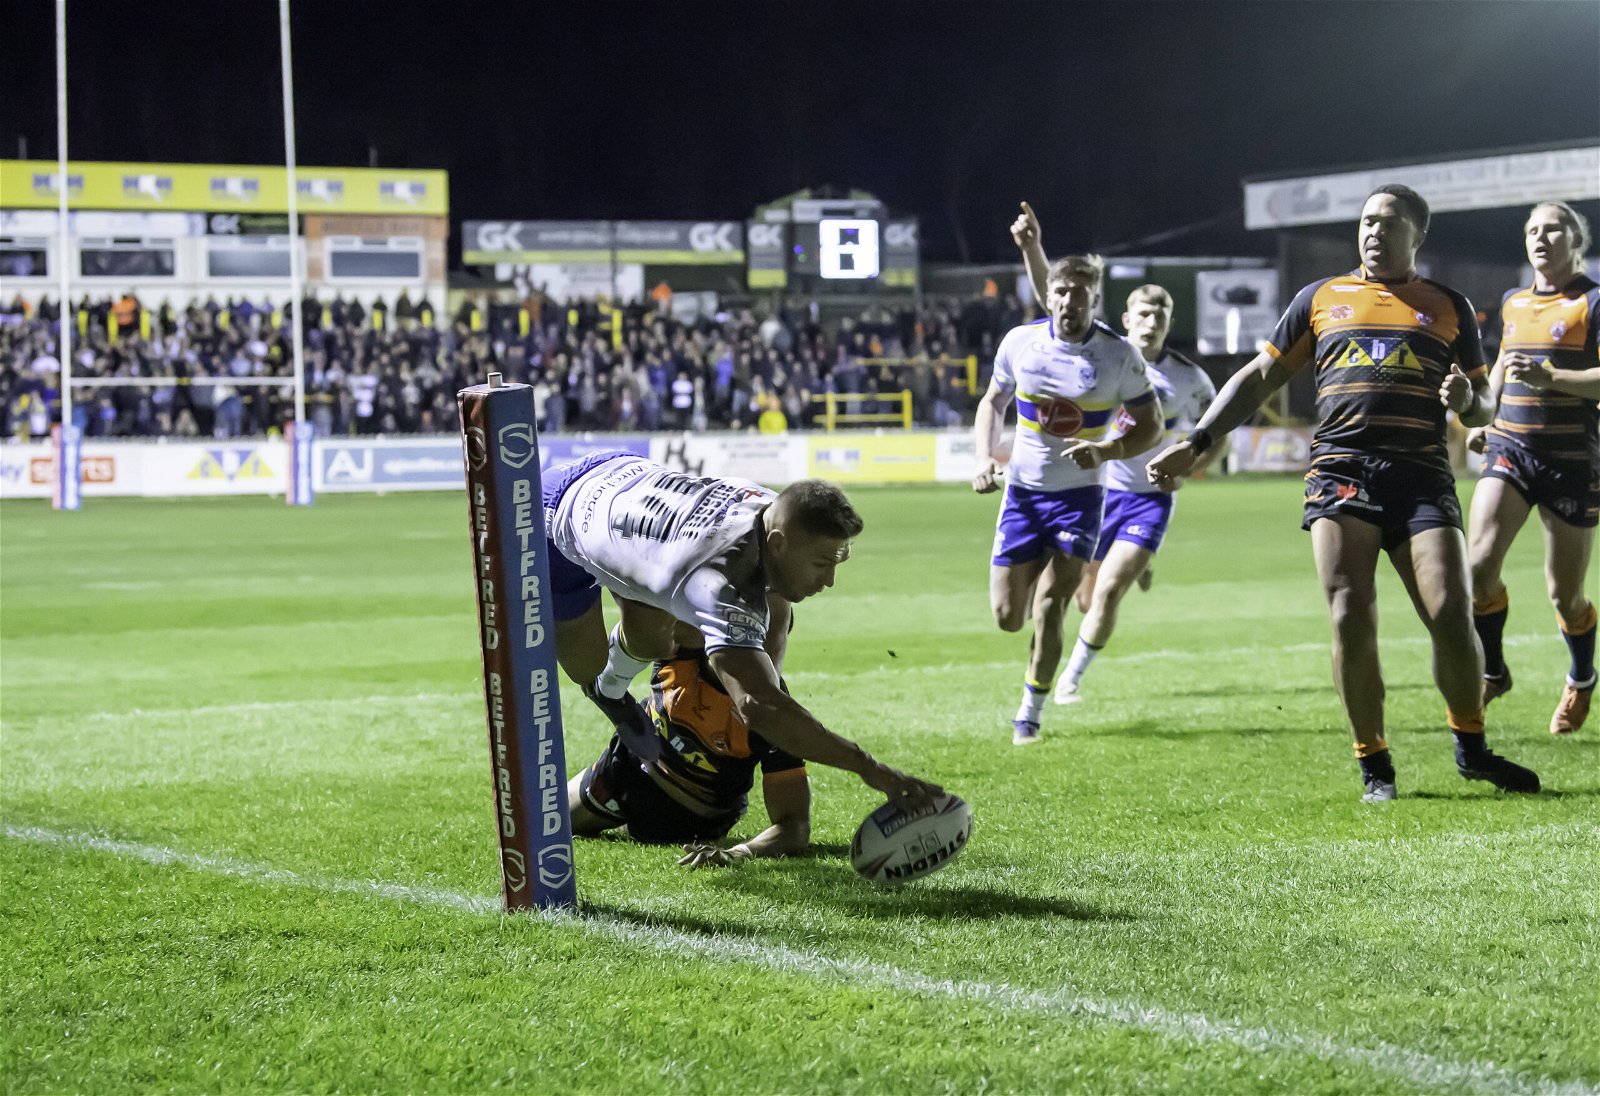 Matty Russell scores an acrobatic try for Warrington against Castleford Tigers.